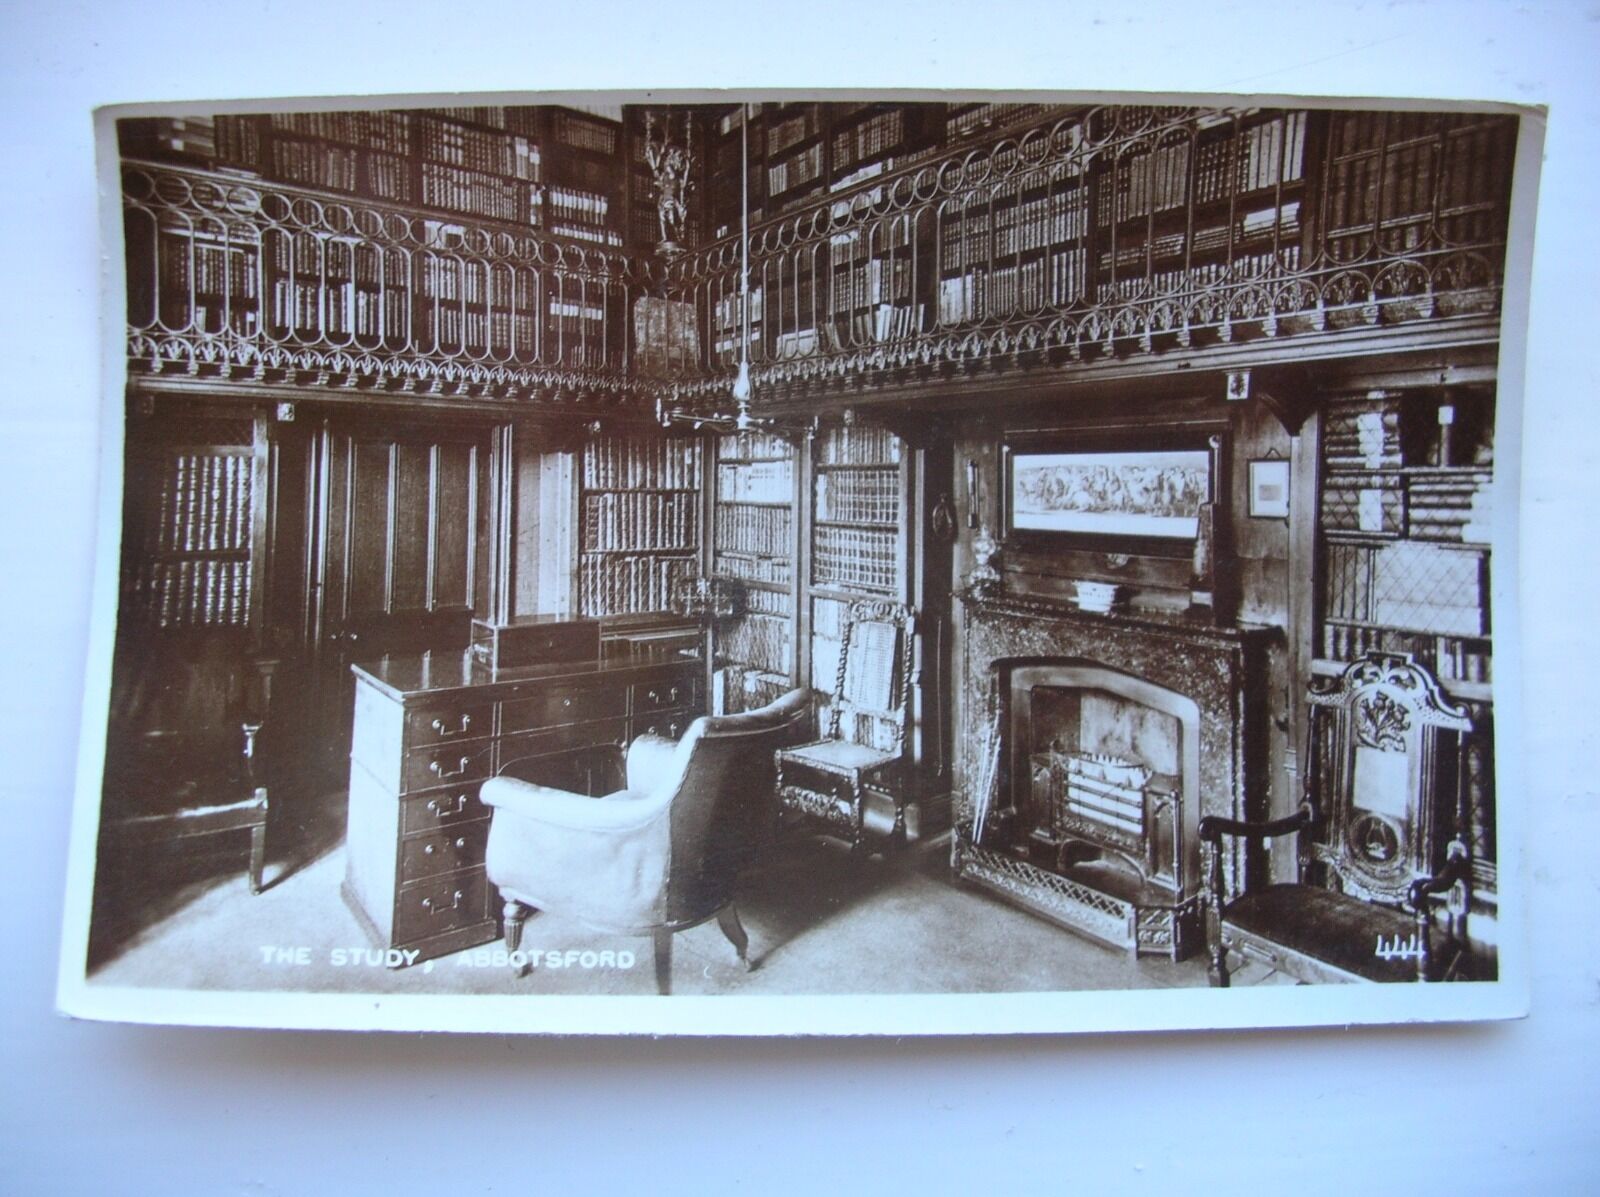 House Clearance - Abbotsford, The Study. (Valentines Real Photograph)